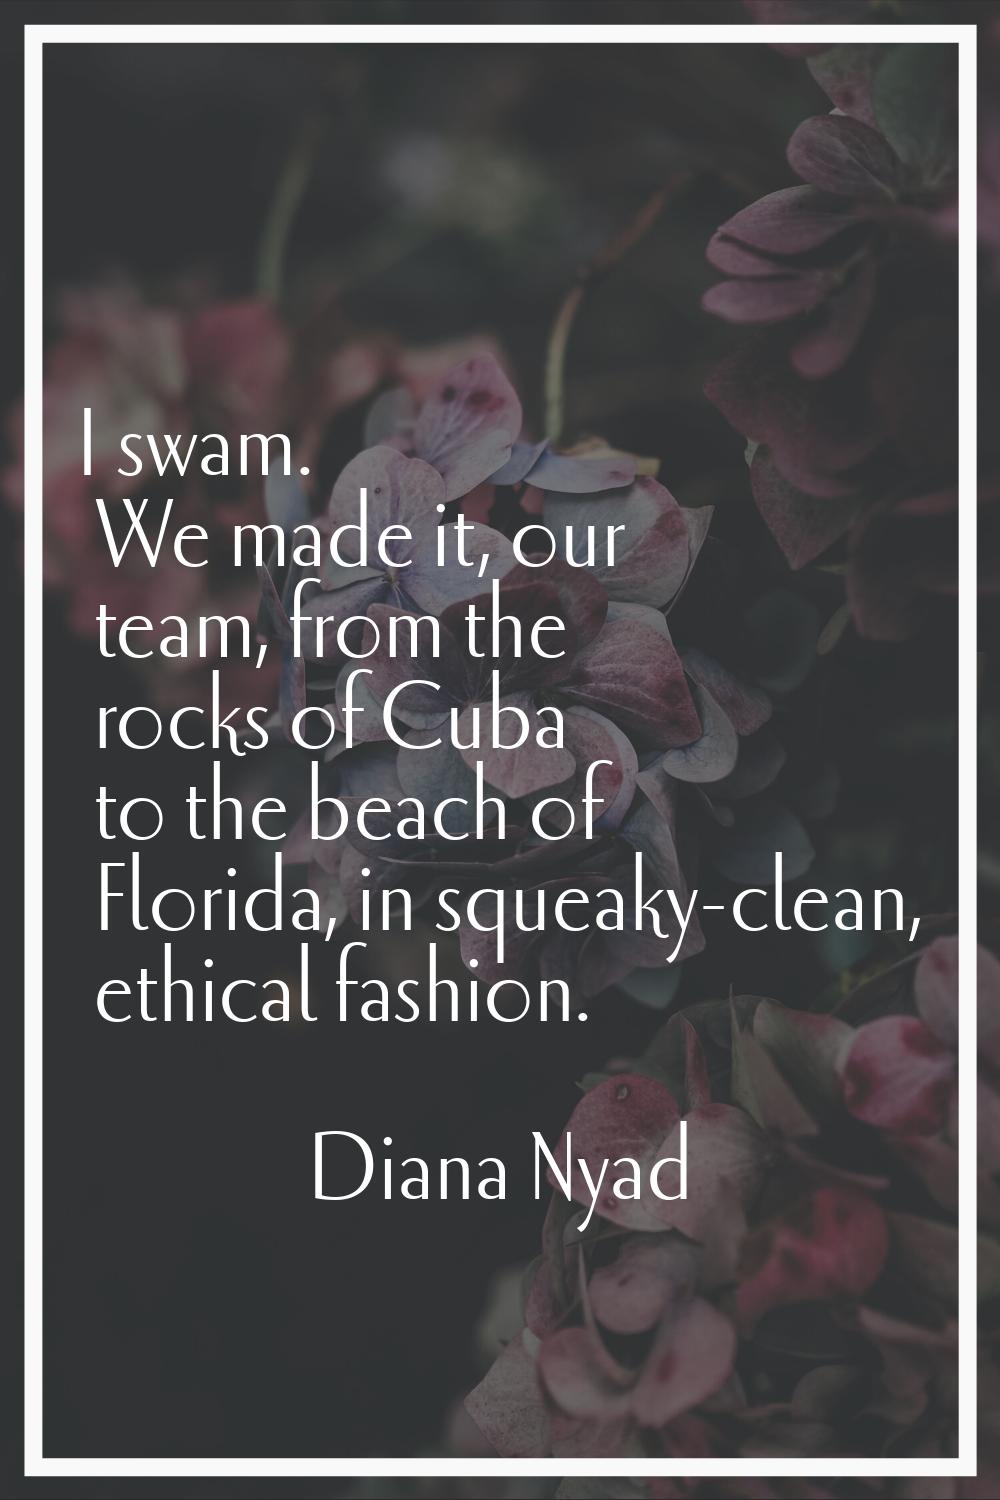 I swam. We made it, our team, from the rocks of Cuba to the beach of Florida, in squeaky-clean, eth